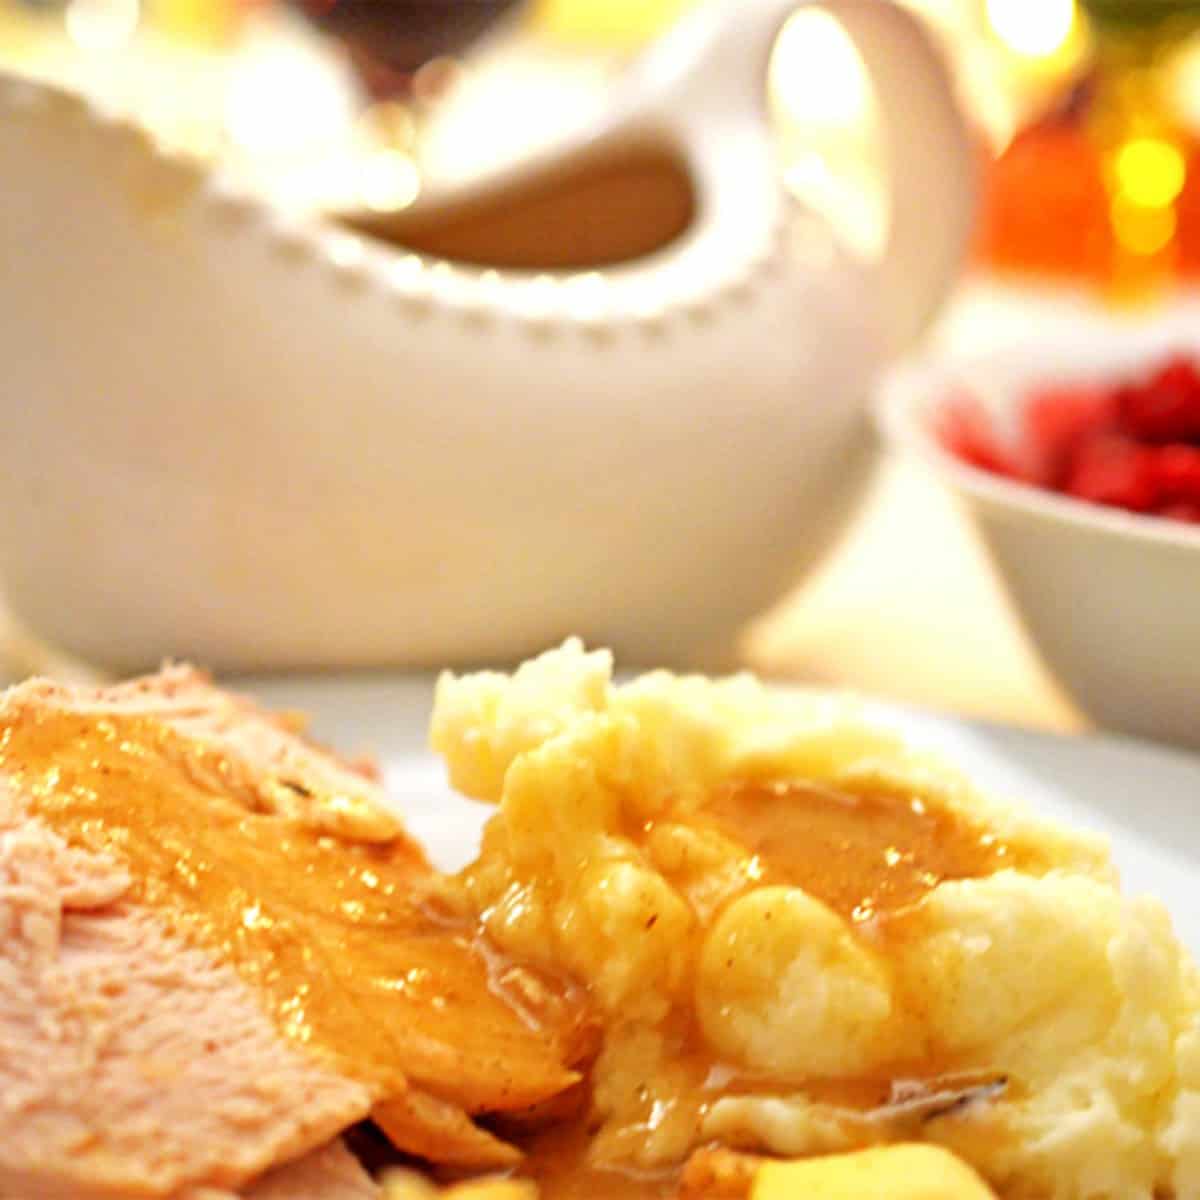 Mashed potatoes with turkey gravy and roasted turkey on a plate.